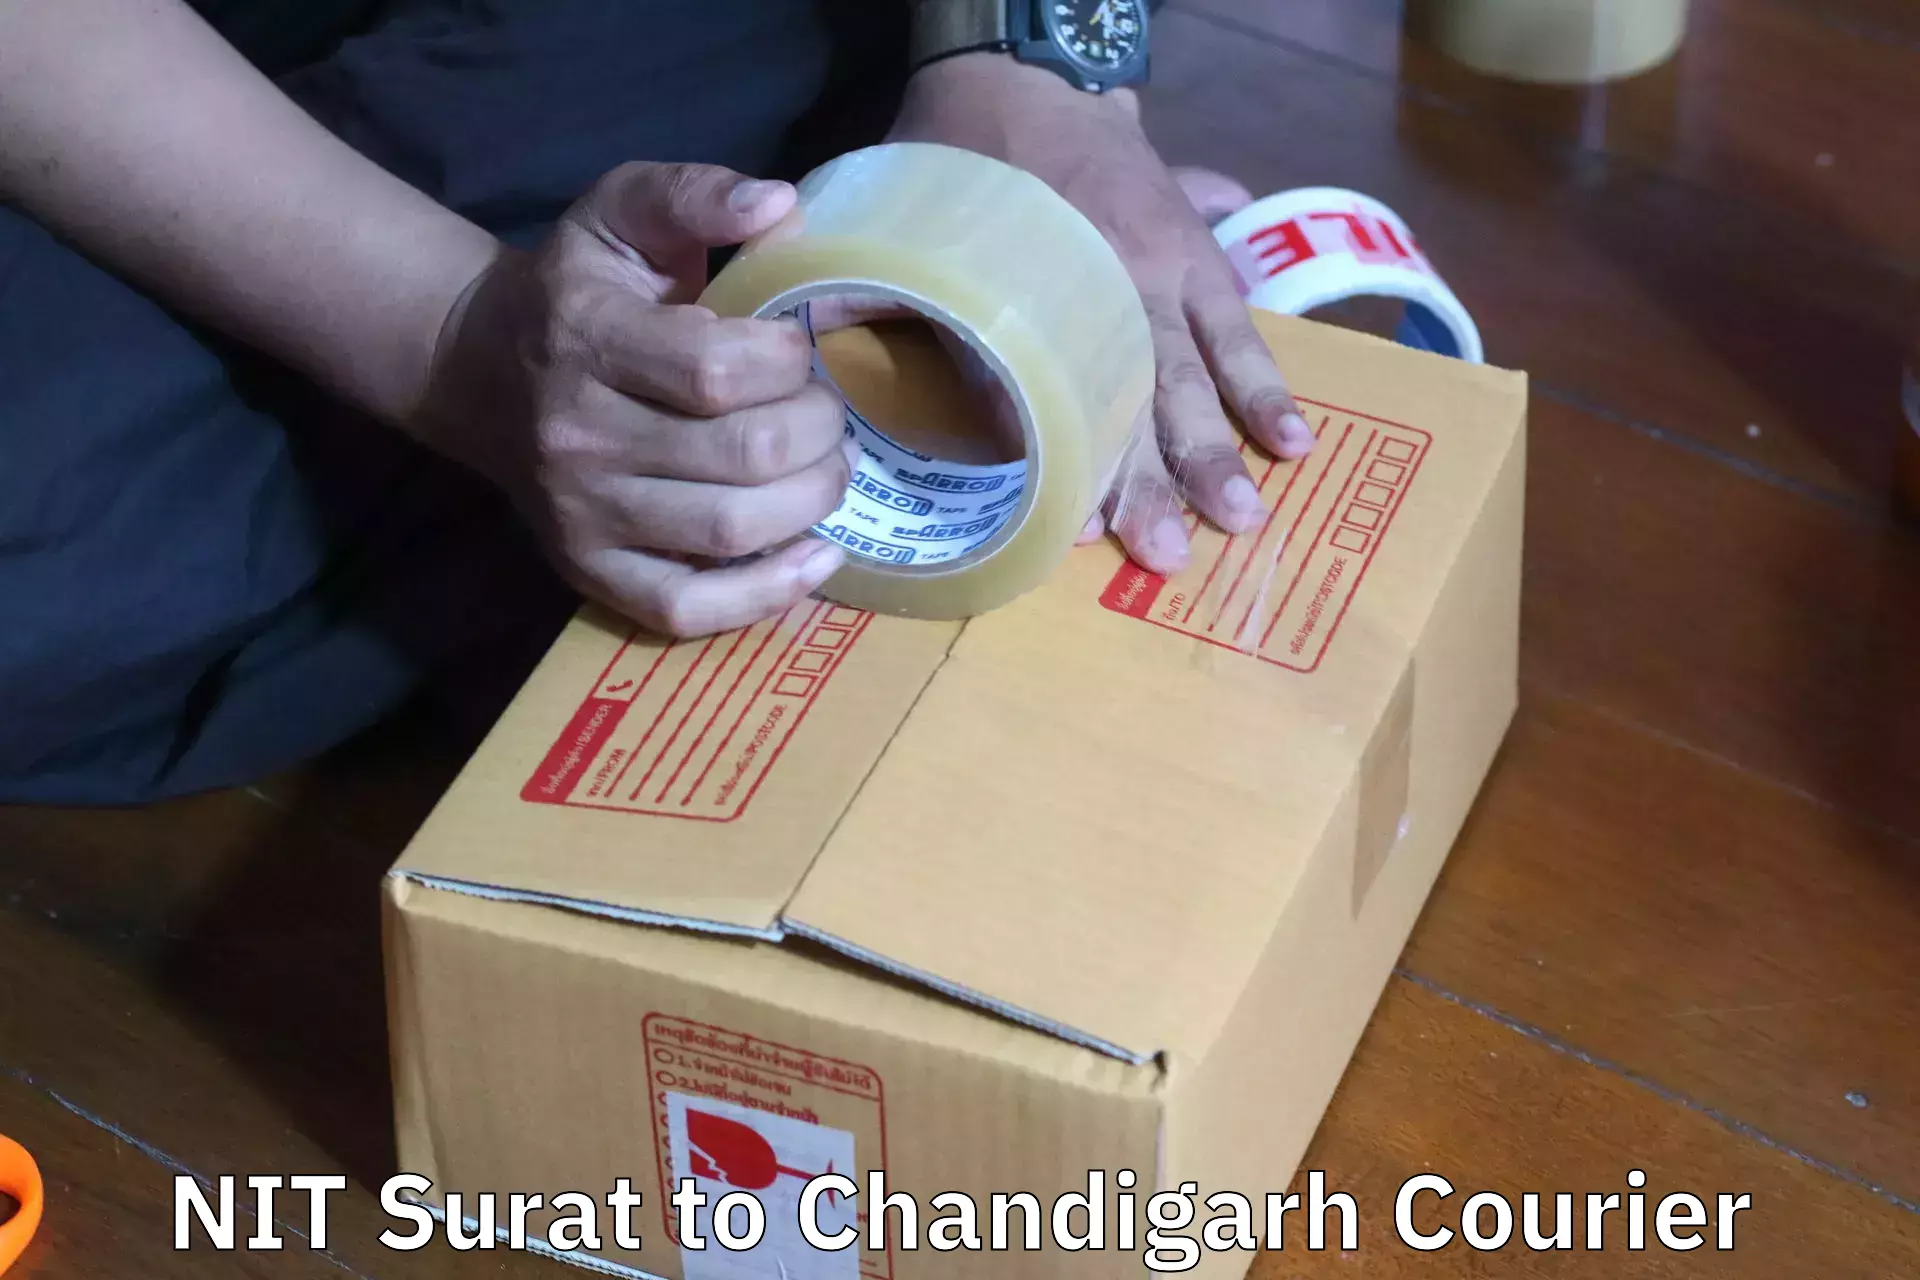 Home relocation experts NIT Surat to Chandigarh